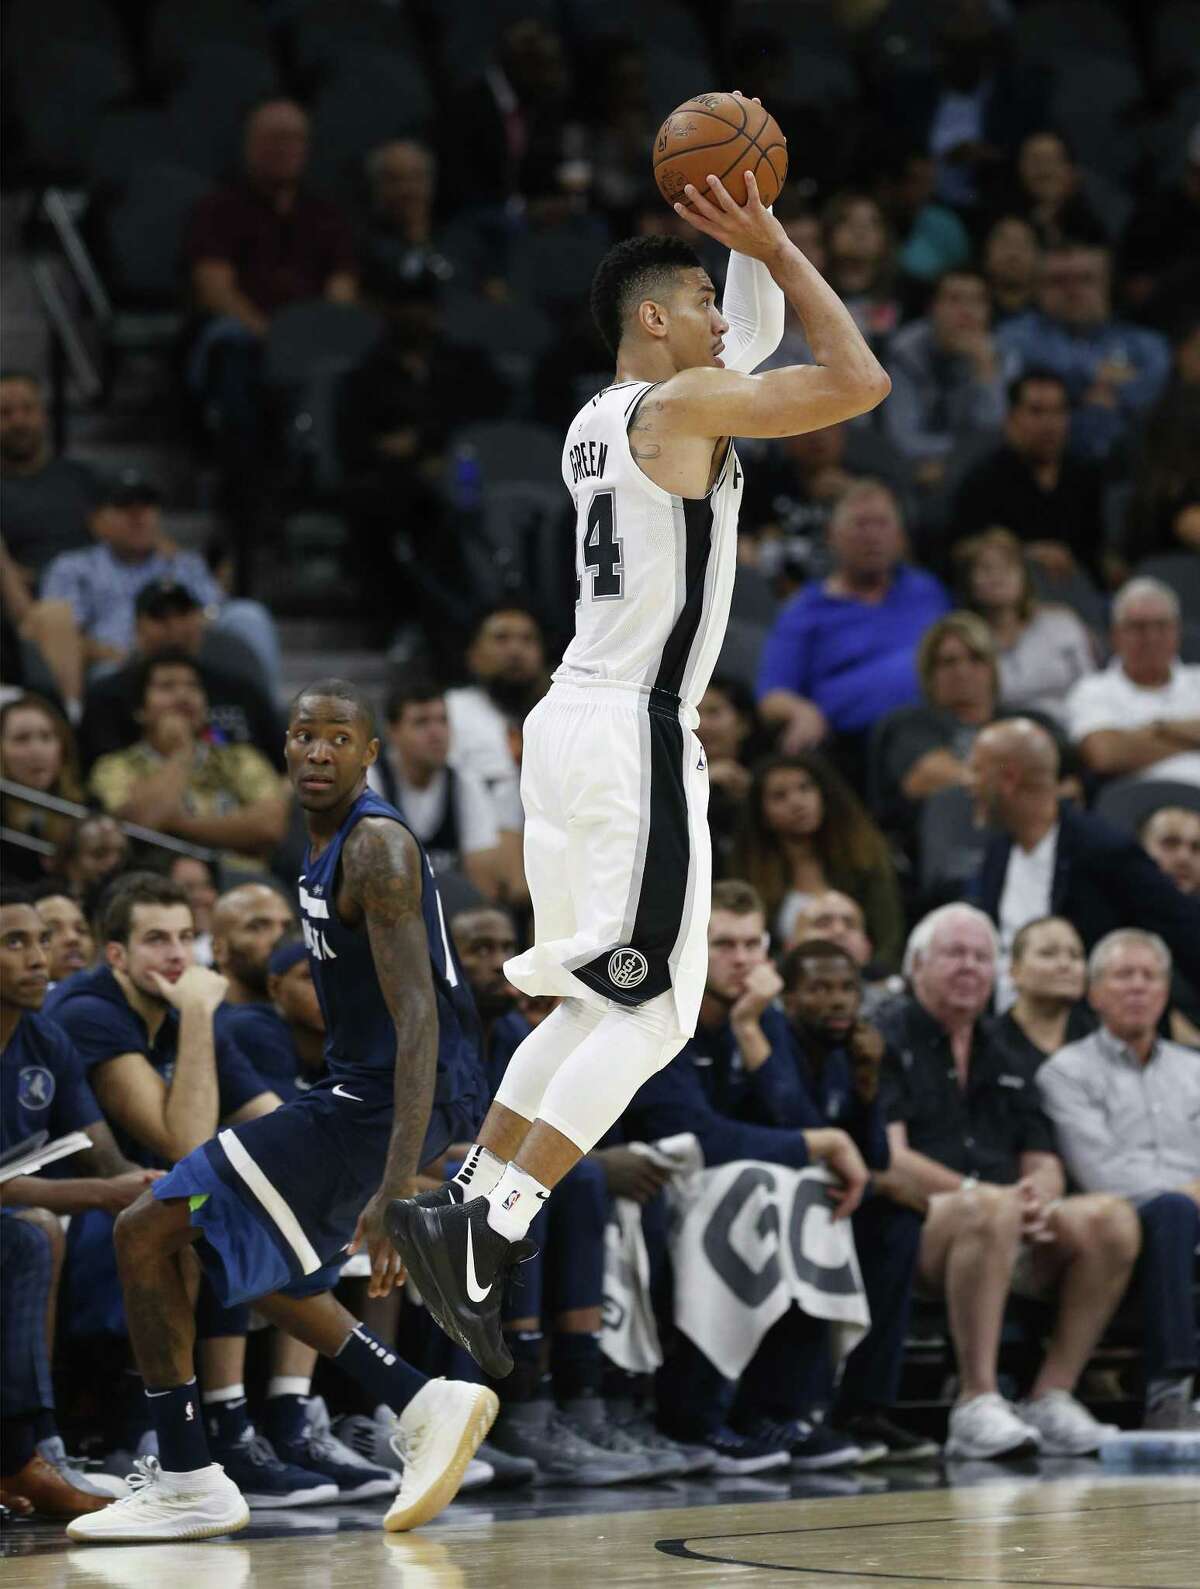 Spurs' Danny Green (14) shoots another three-pointer against Minnesota Timberwolves' Jamal Crawford (11) in the fourth at the AT&T Center on Wednesday, Oct. 18, 2017. Spurs defeated the T'Wolves, 107-99. (Kin Man Hui/San Antonio Express-News)